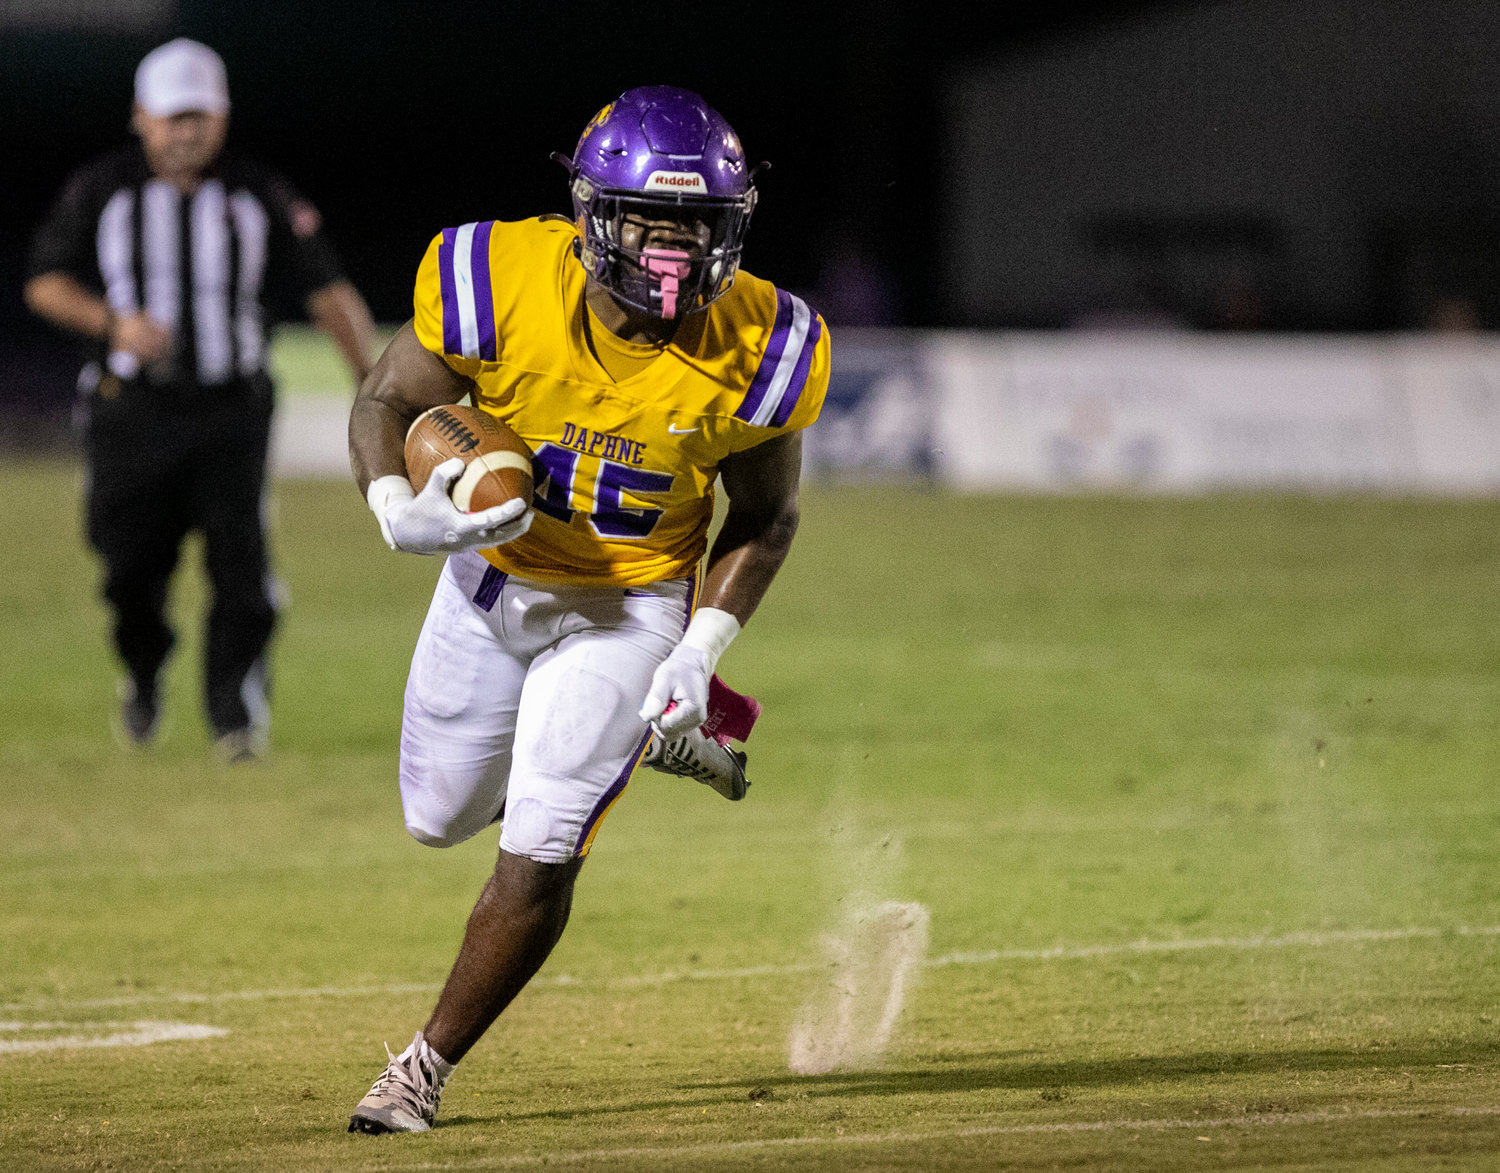 Daphne junior Nick Clark looks for running room near the sideline in the first half of the Trojans’ home region tilt with the Fairhope Pirates at Jubilee Stadium Friday night. Clark scored on a 7-yard rush in the third quarter.